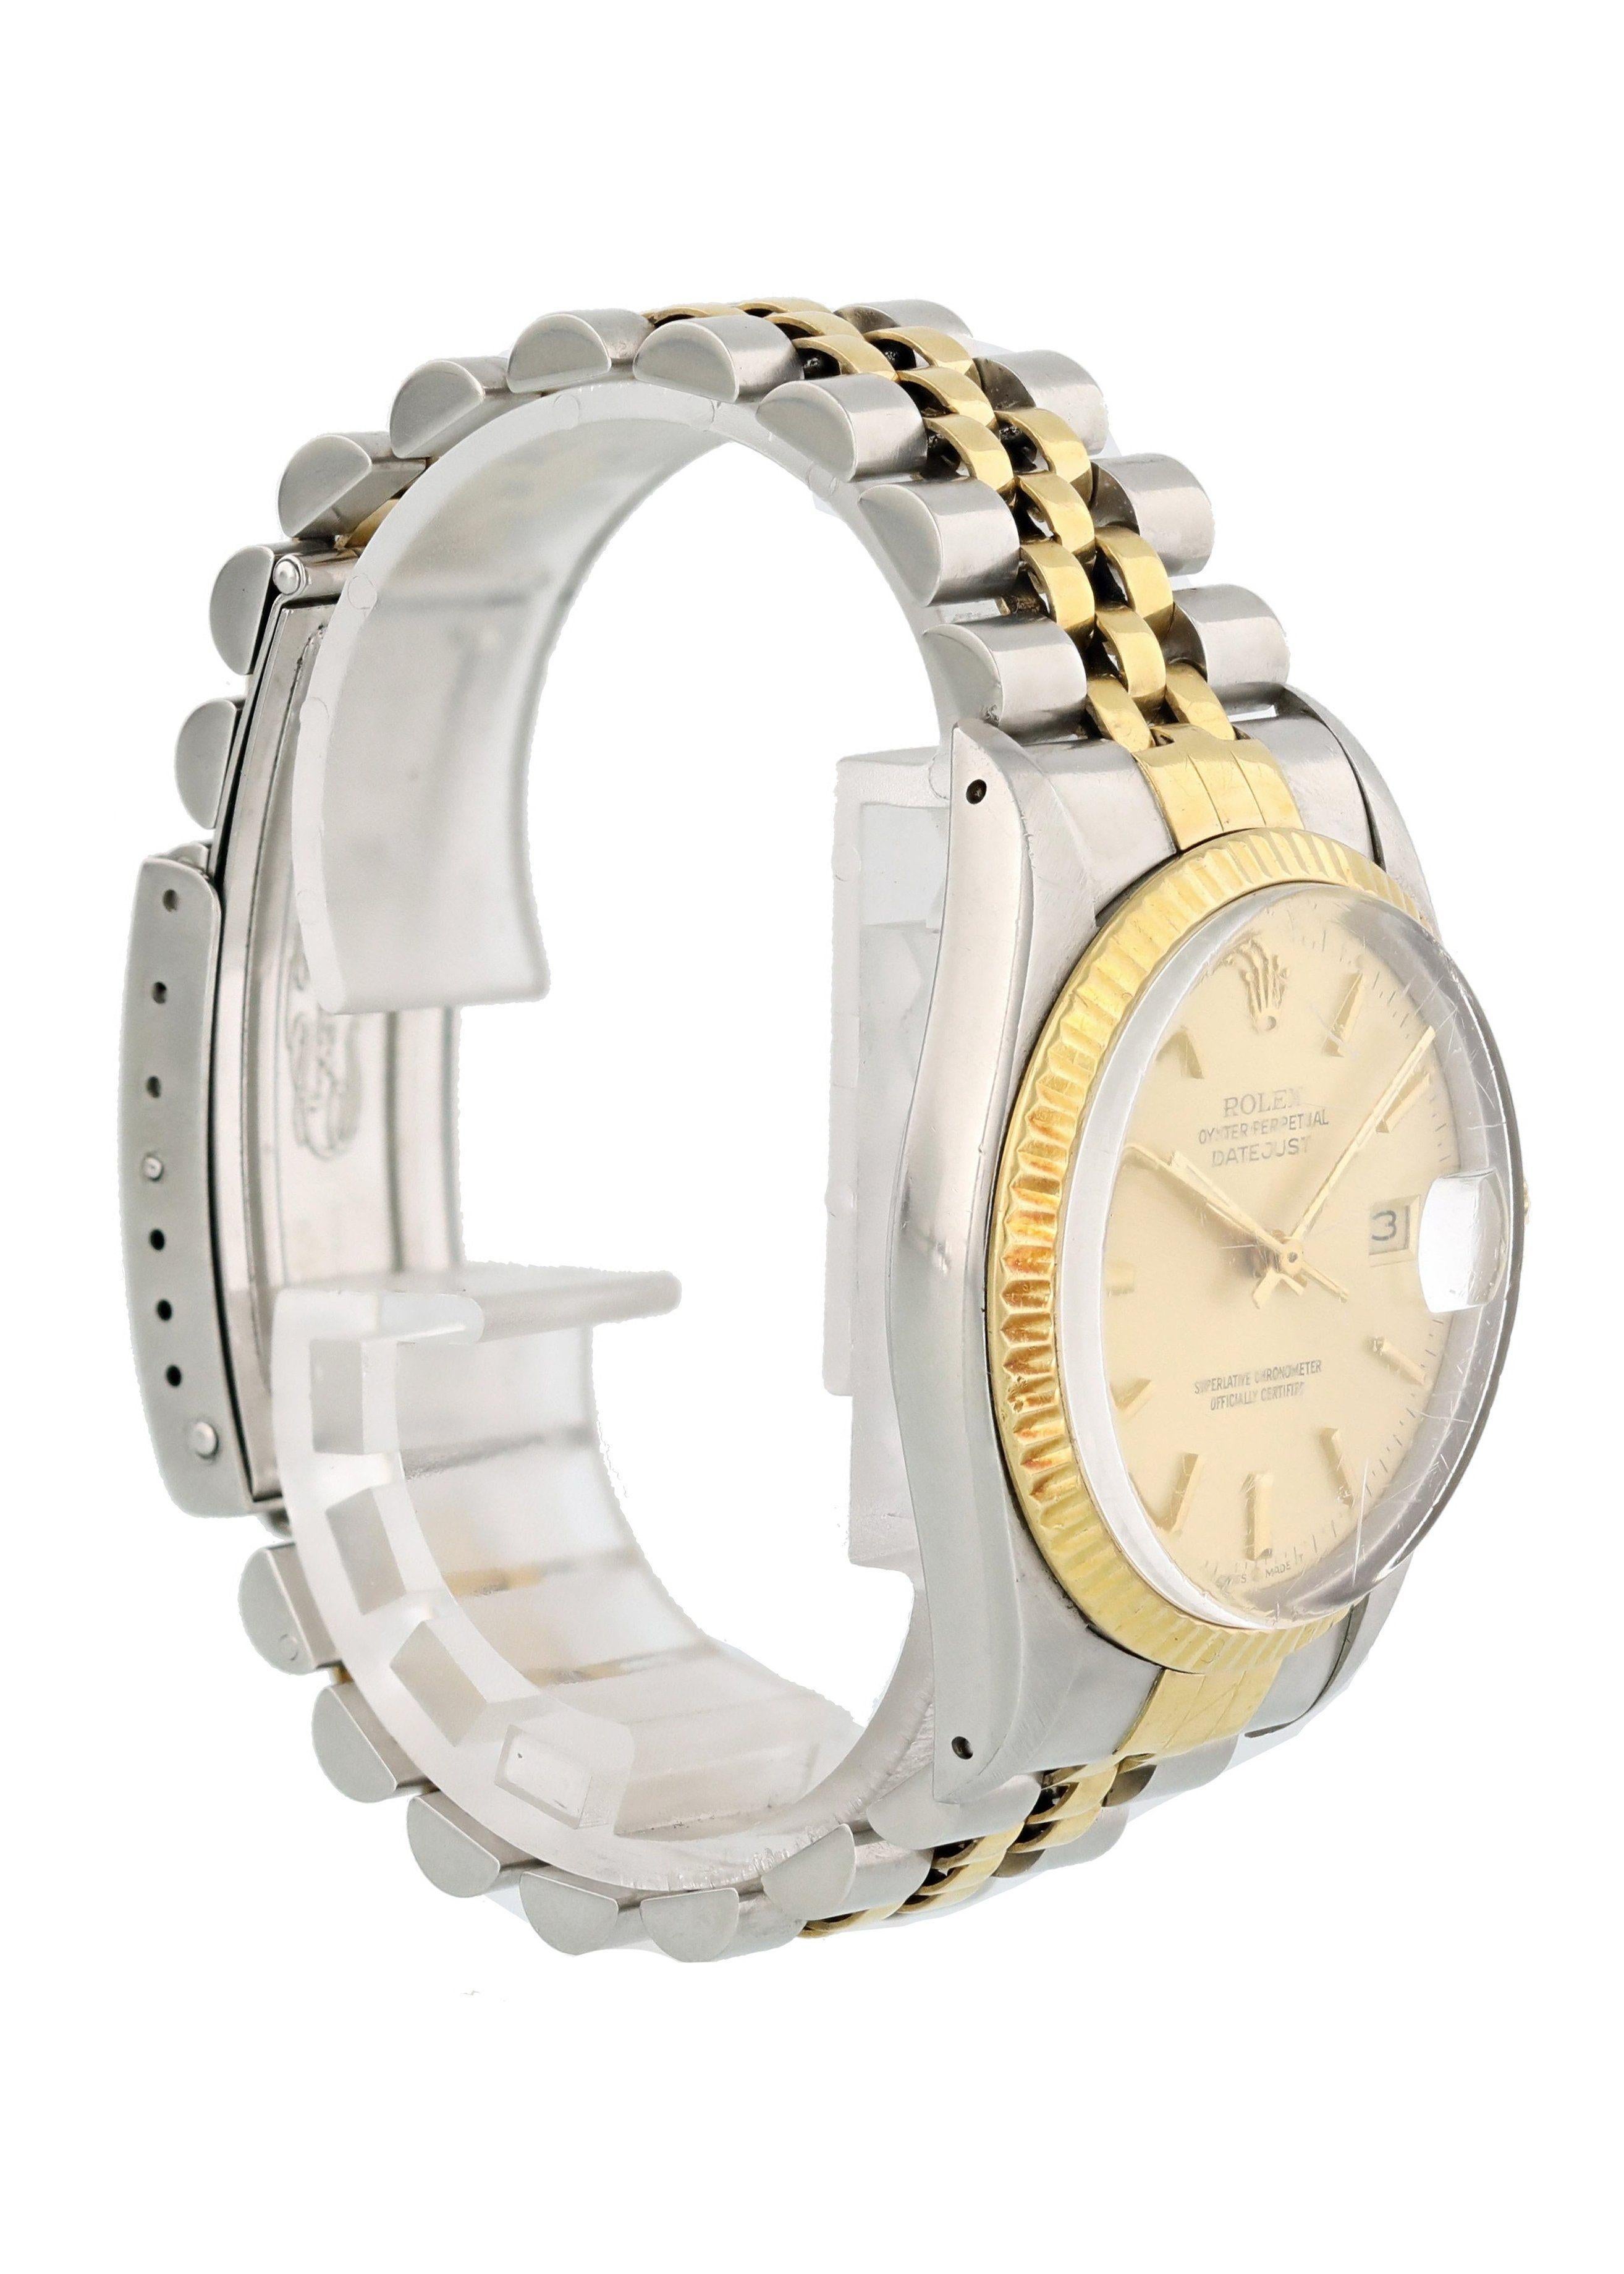 Rolex Oyster Perpetual Datejust 16013 Men's Watch In Excellent Condition For Sale In New York, NY